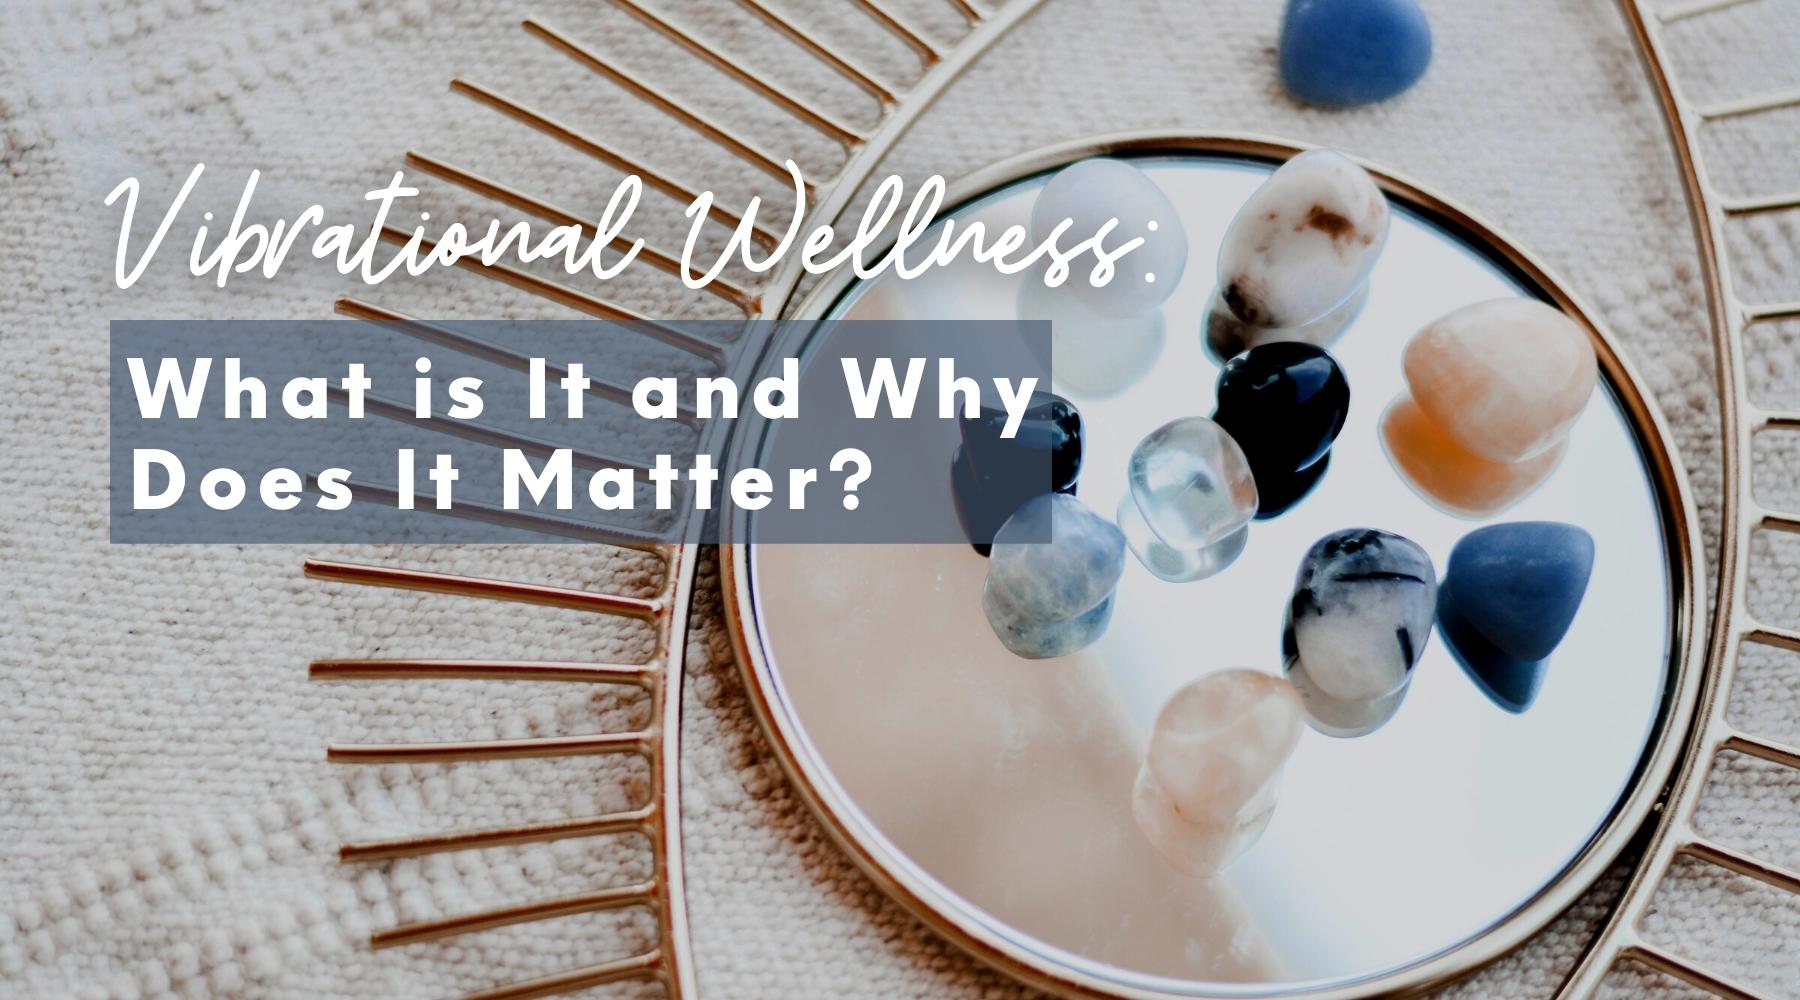 Vibrational Wellness: What is It and Why Does It Matter?